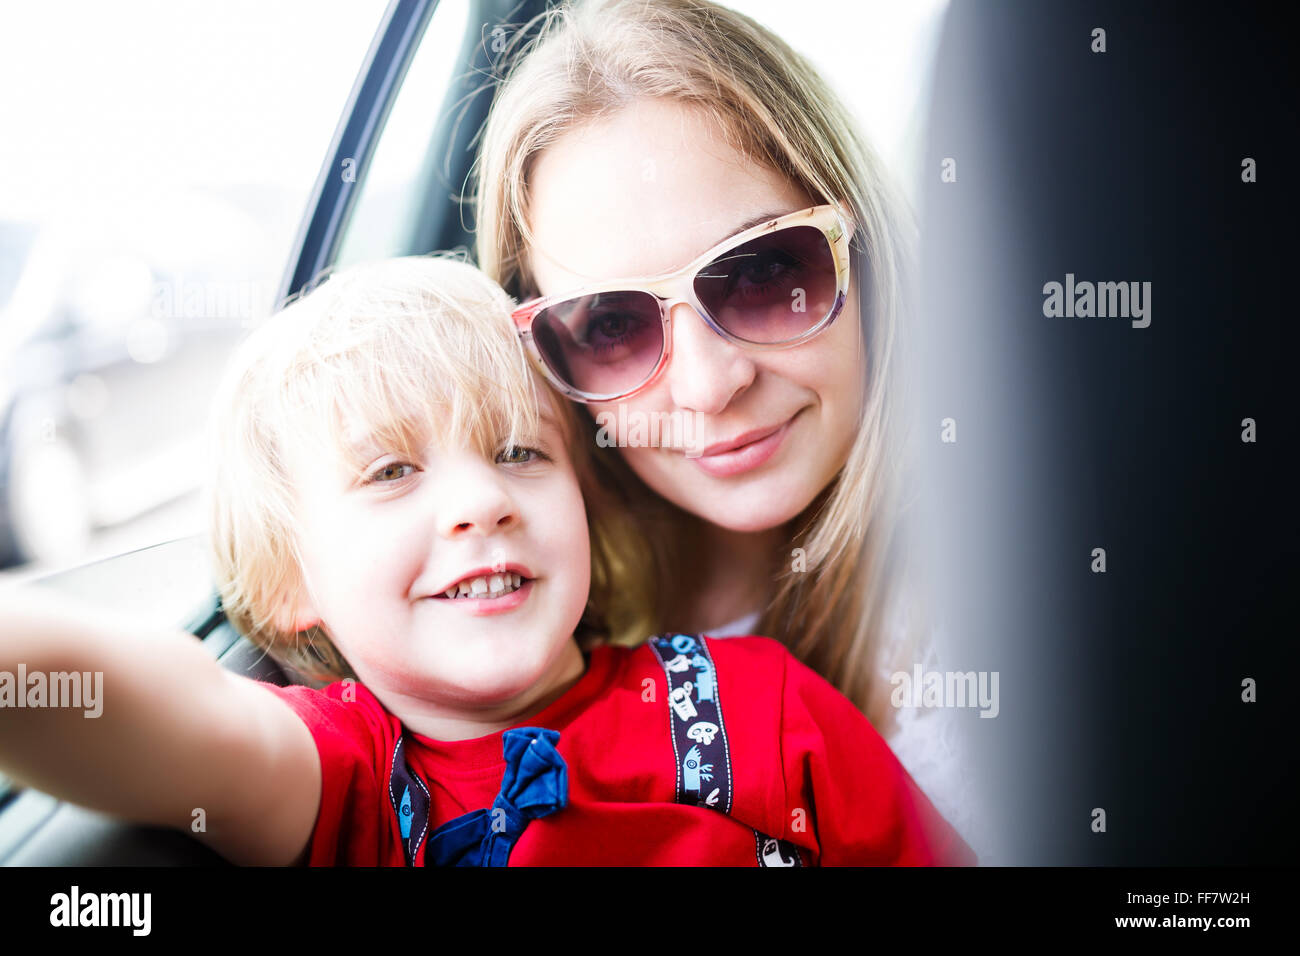 Portrain of mother and son in the car Stock Photo